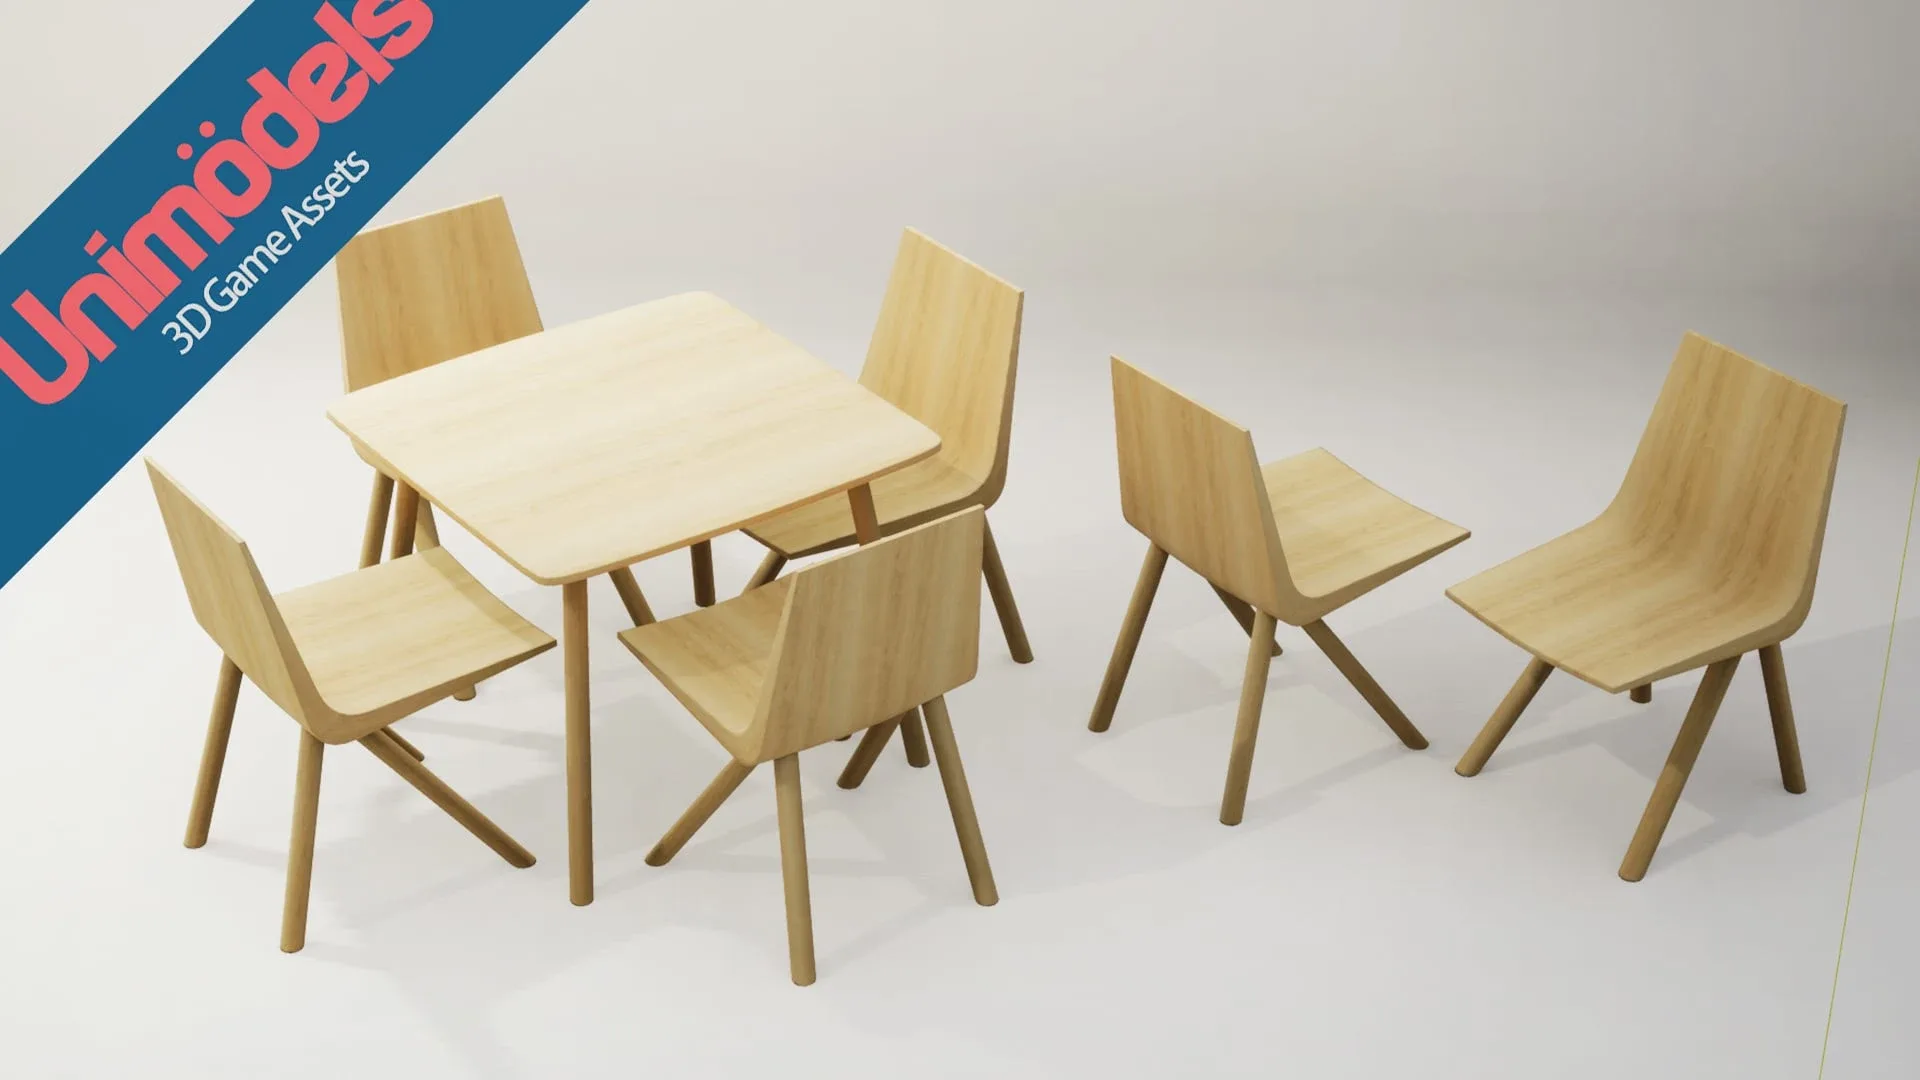 Unimodels Chairs and Tables Vol. 3 for UE4